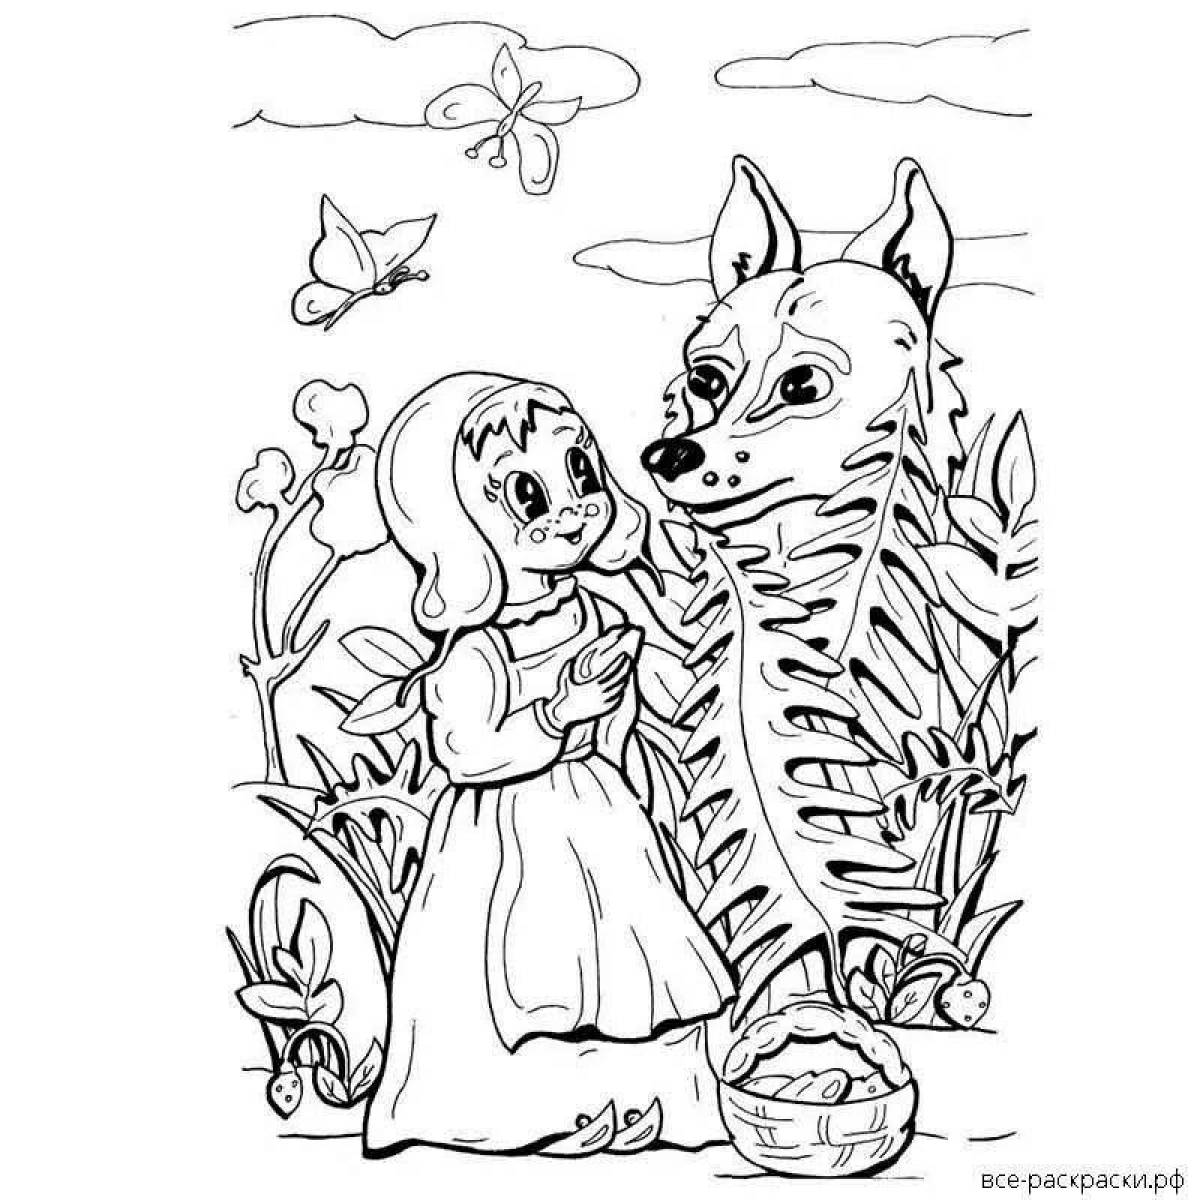 Extraordinary coloring wolf and little red riding hood